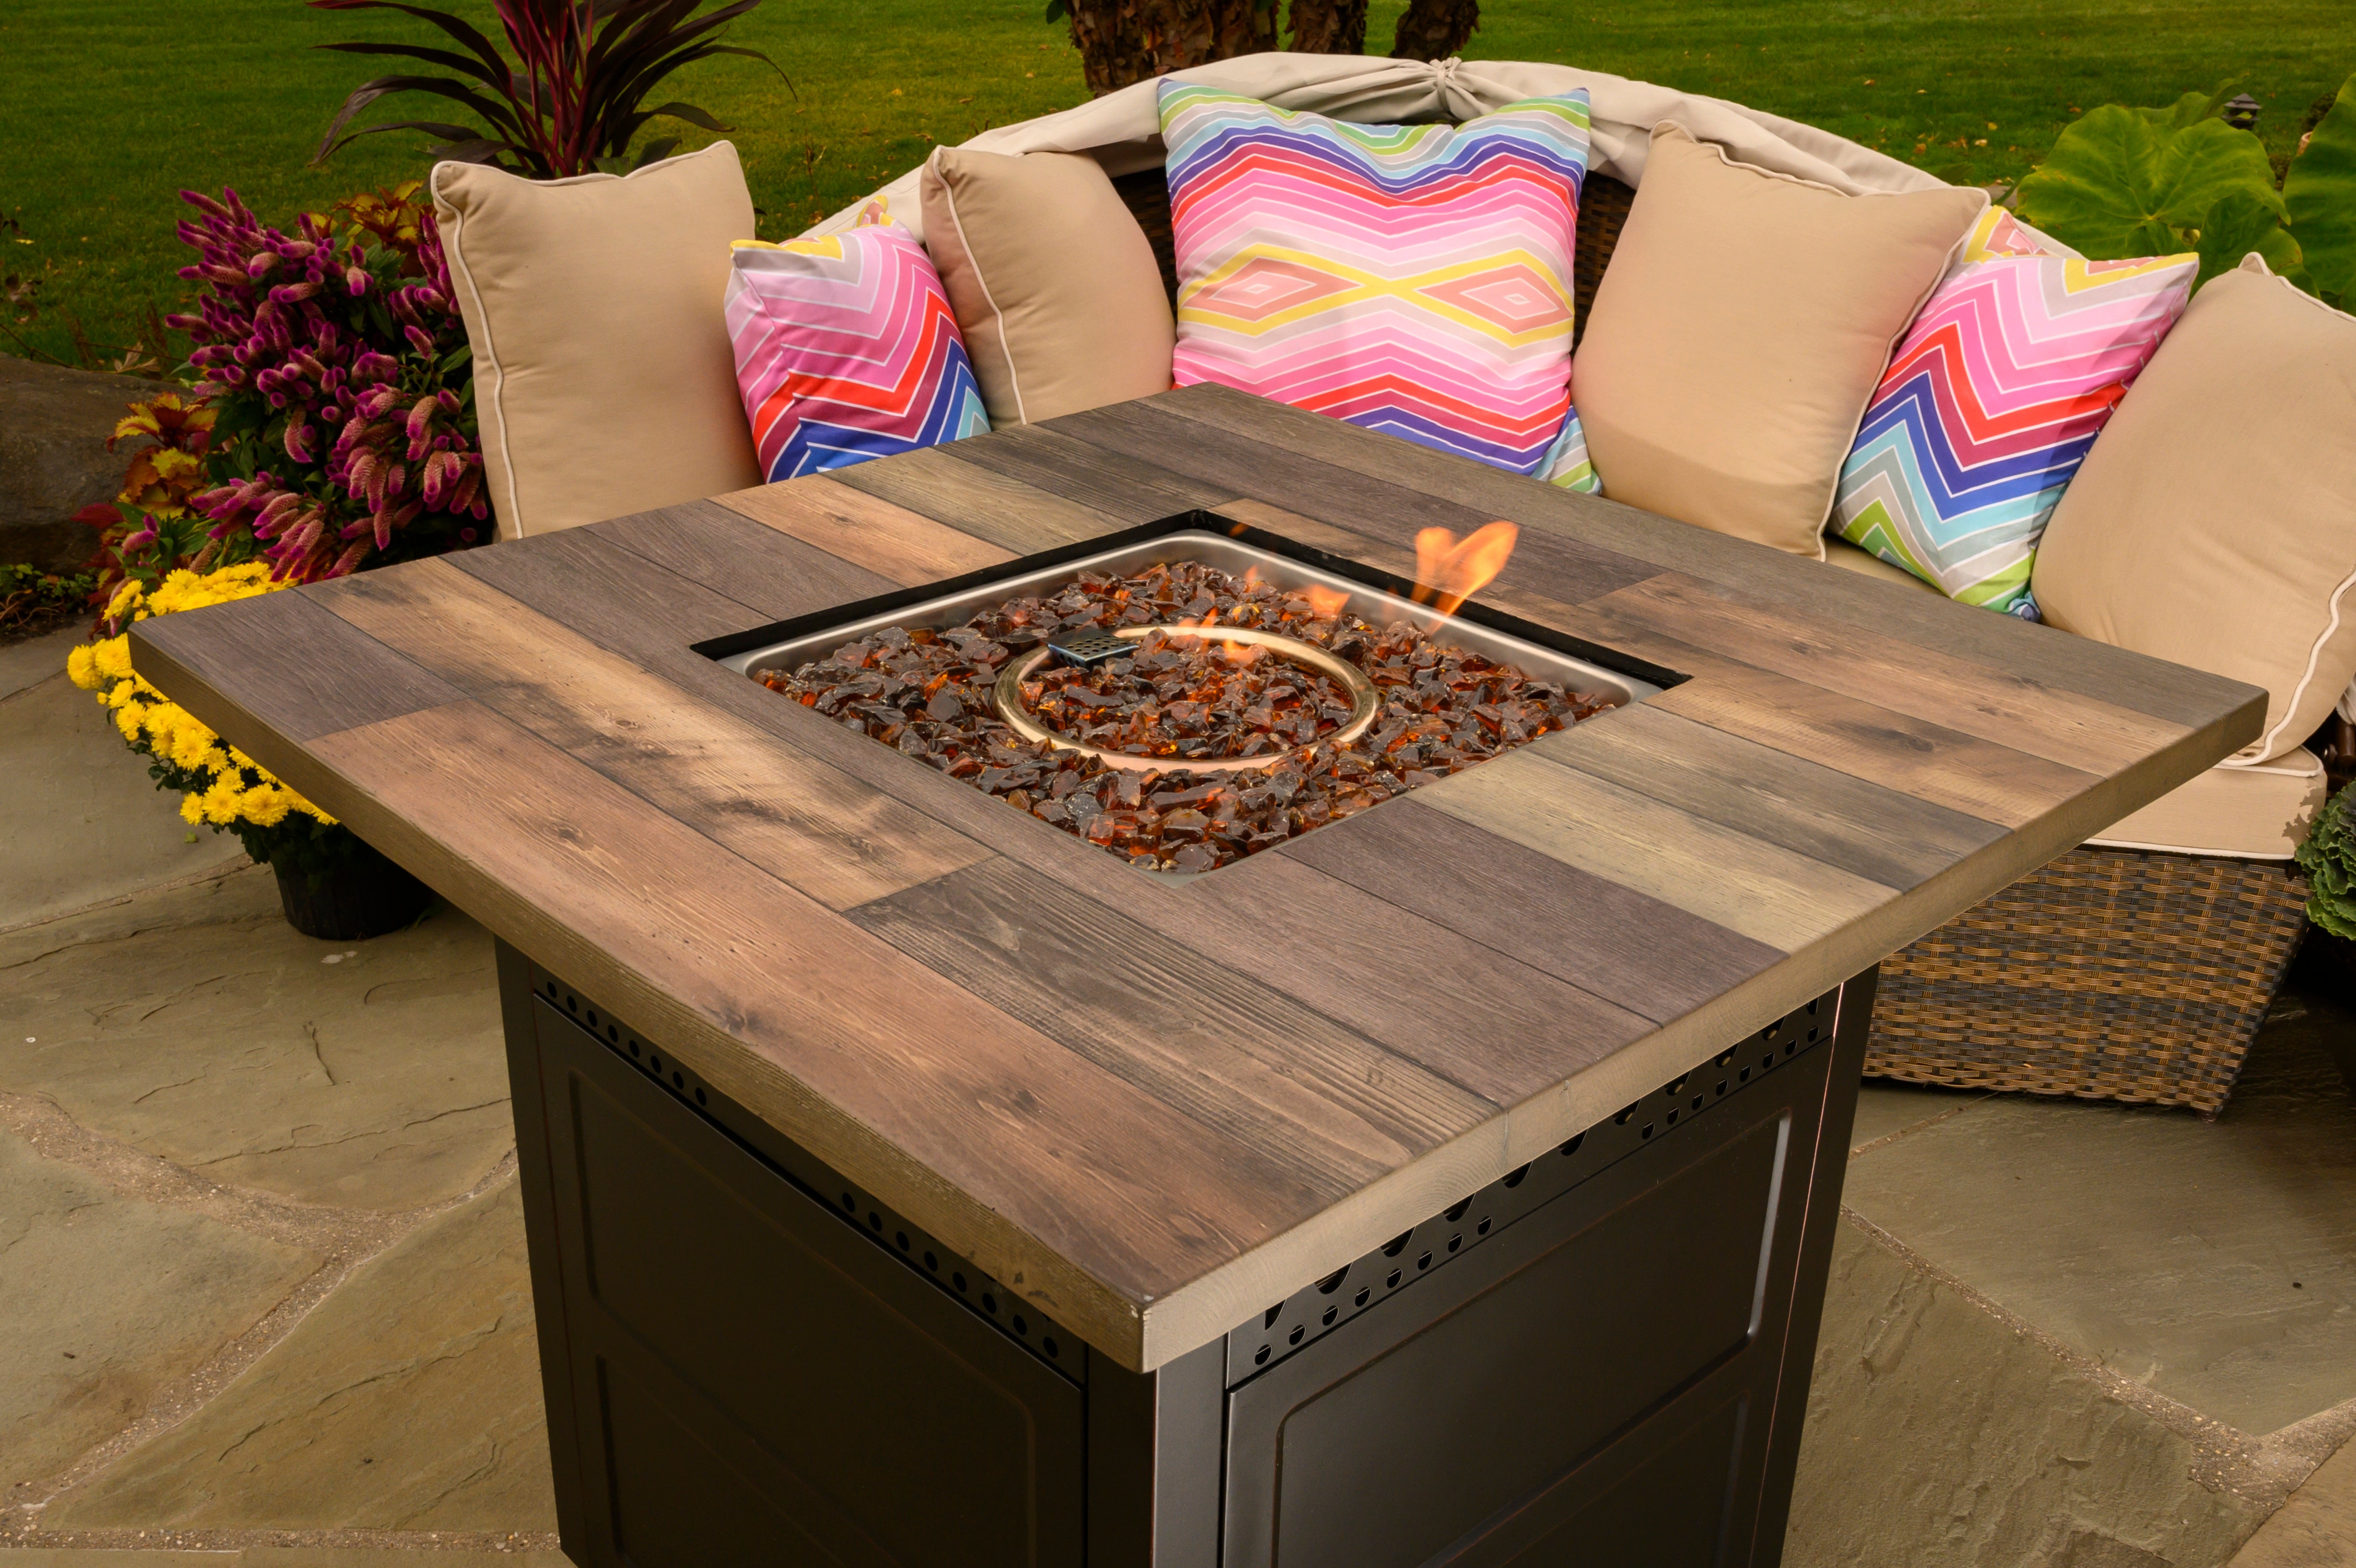 Endless Summer The Harris. Dual Heat LP Gas Outdoor Fire Pit/Patio Heater with Wood Look Resin Mantel